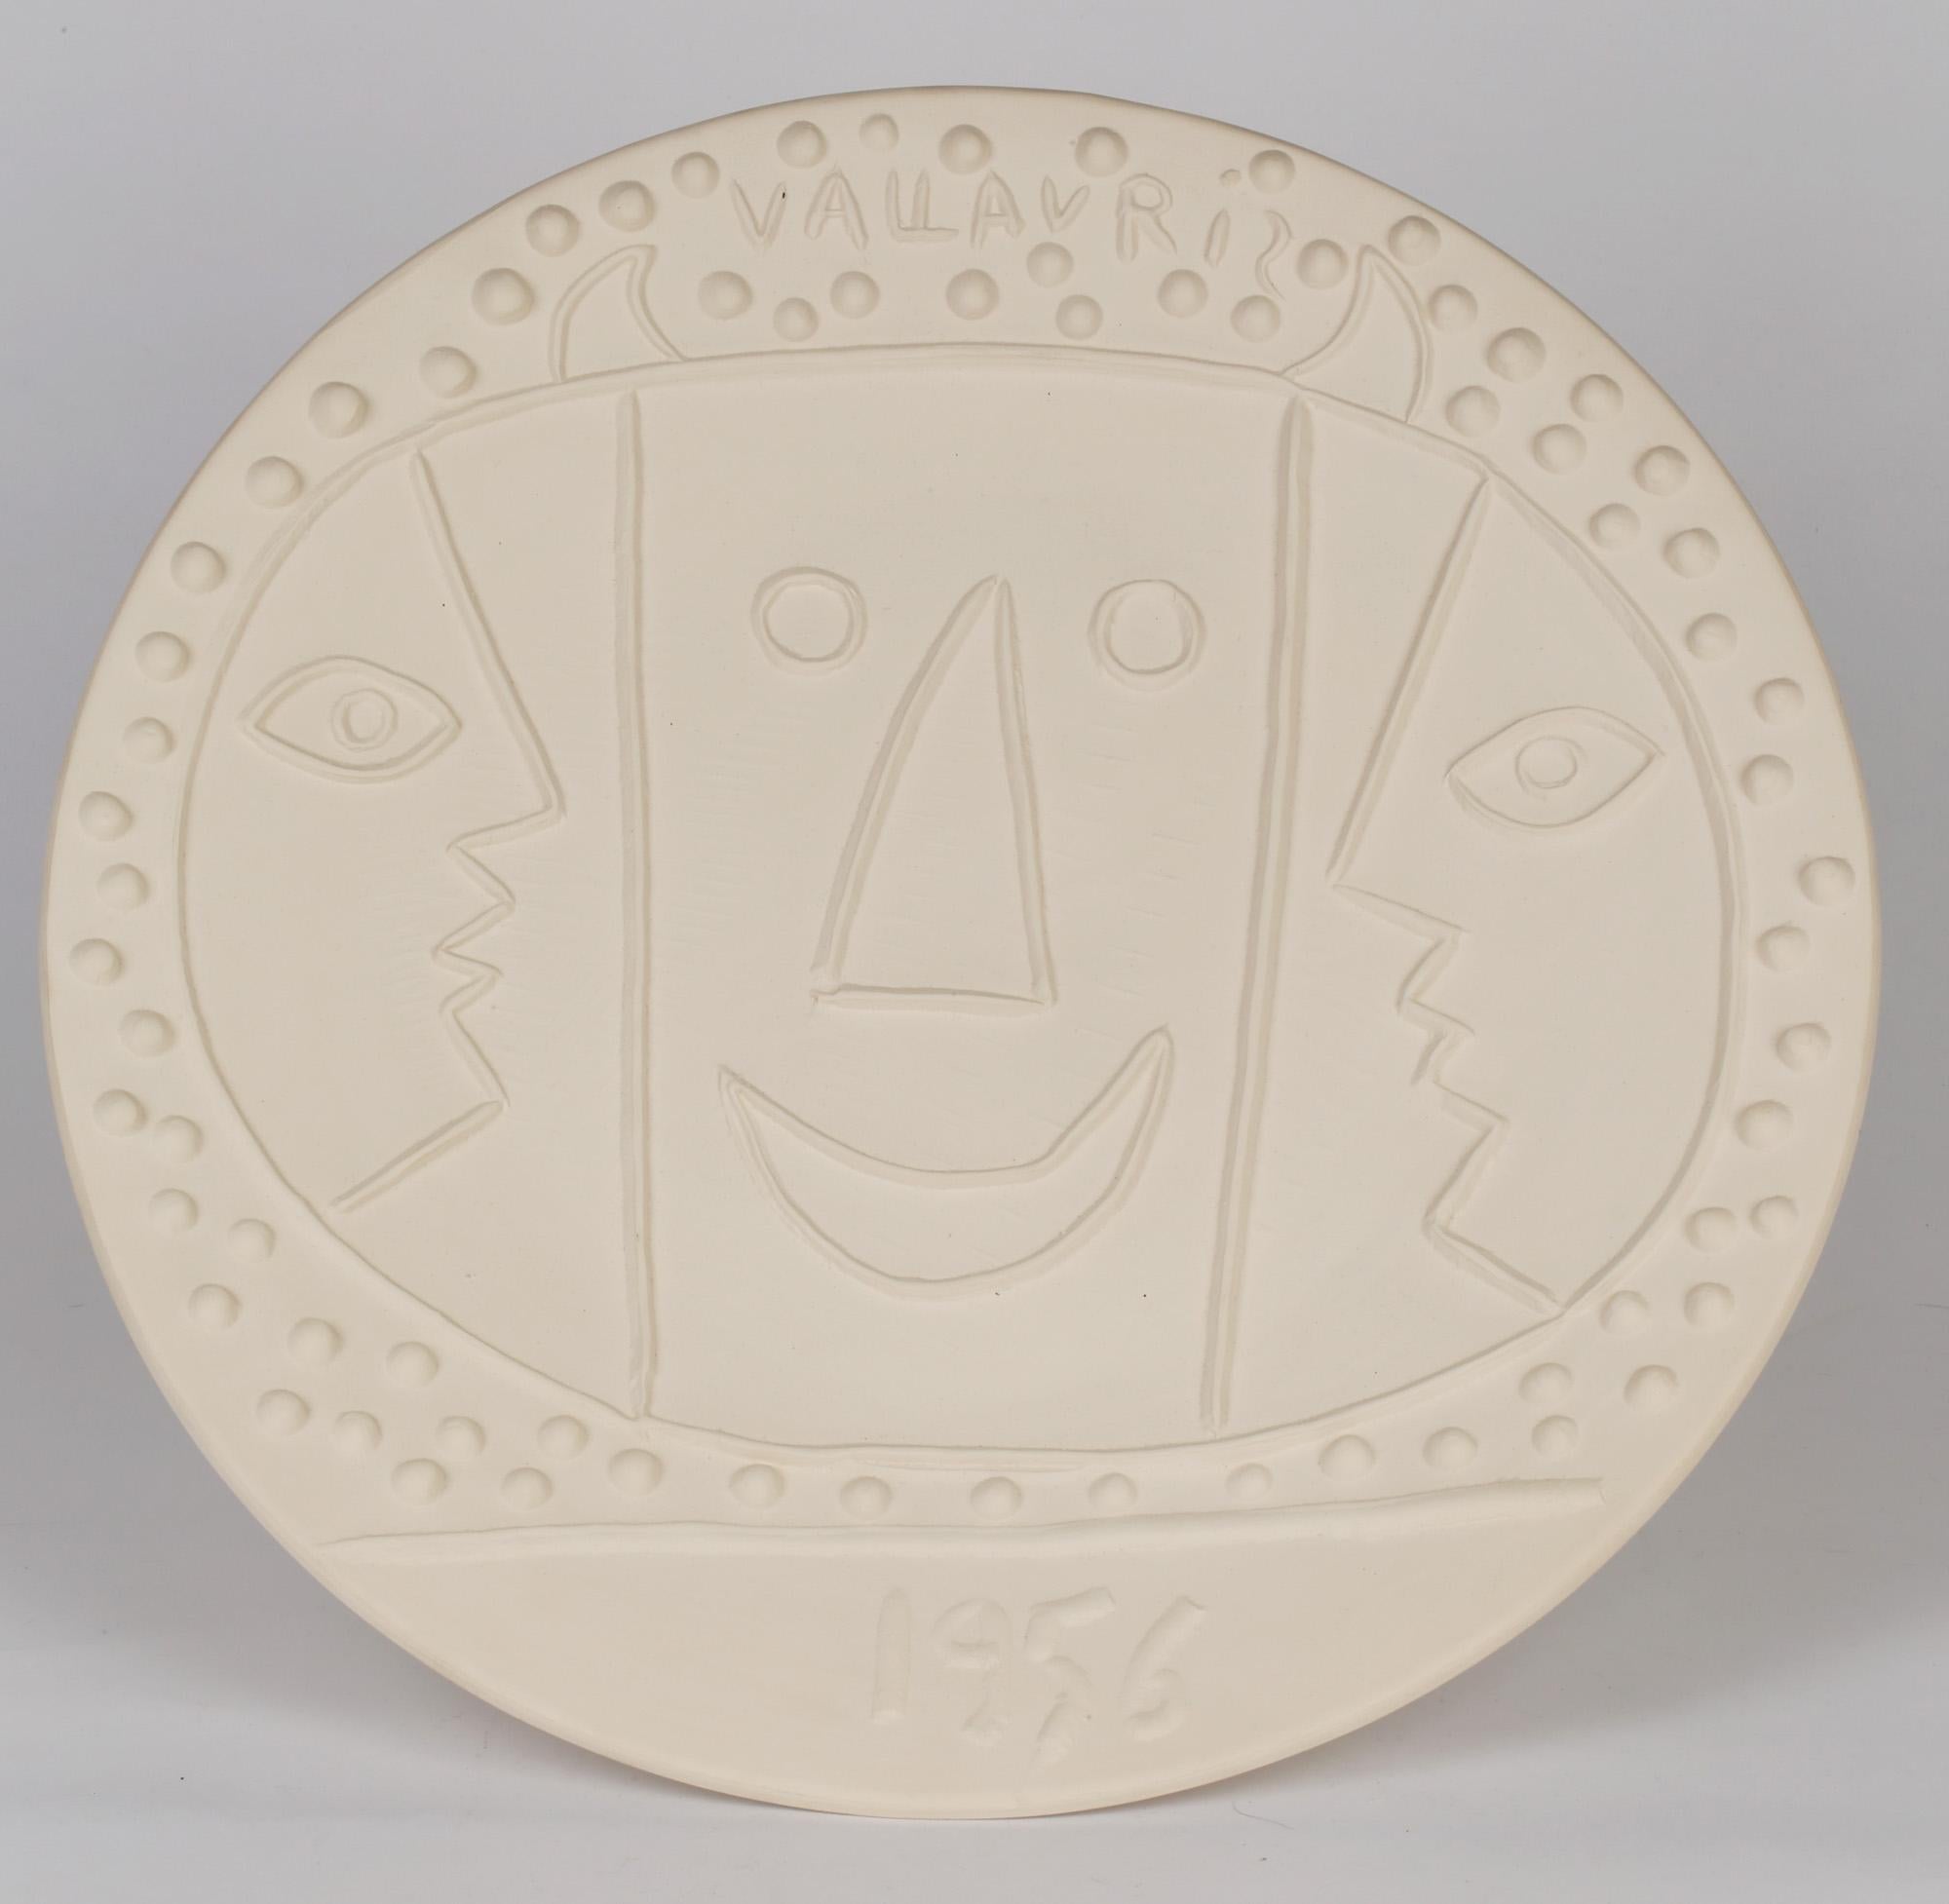 Pablo Picasso Vallauris A.R. 330 Limited Edition Plate With Three Faces, 1956 For Sale 6